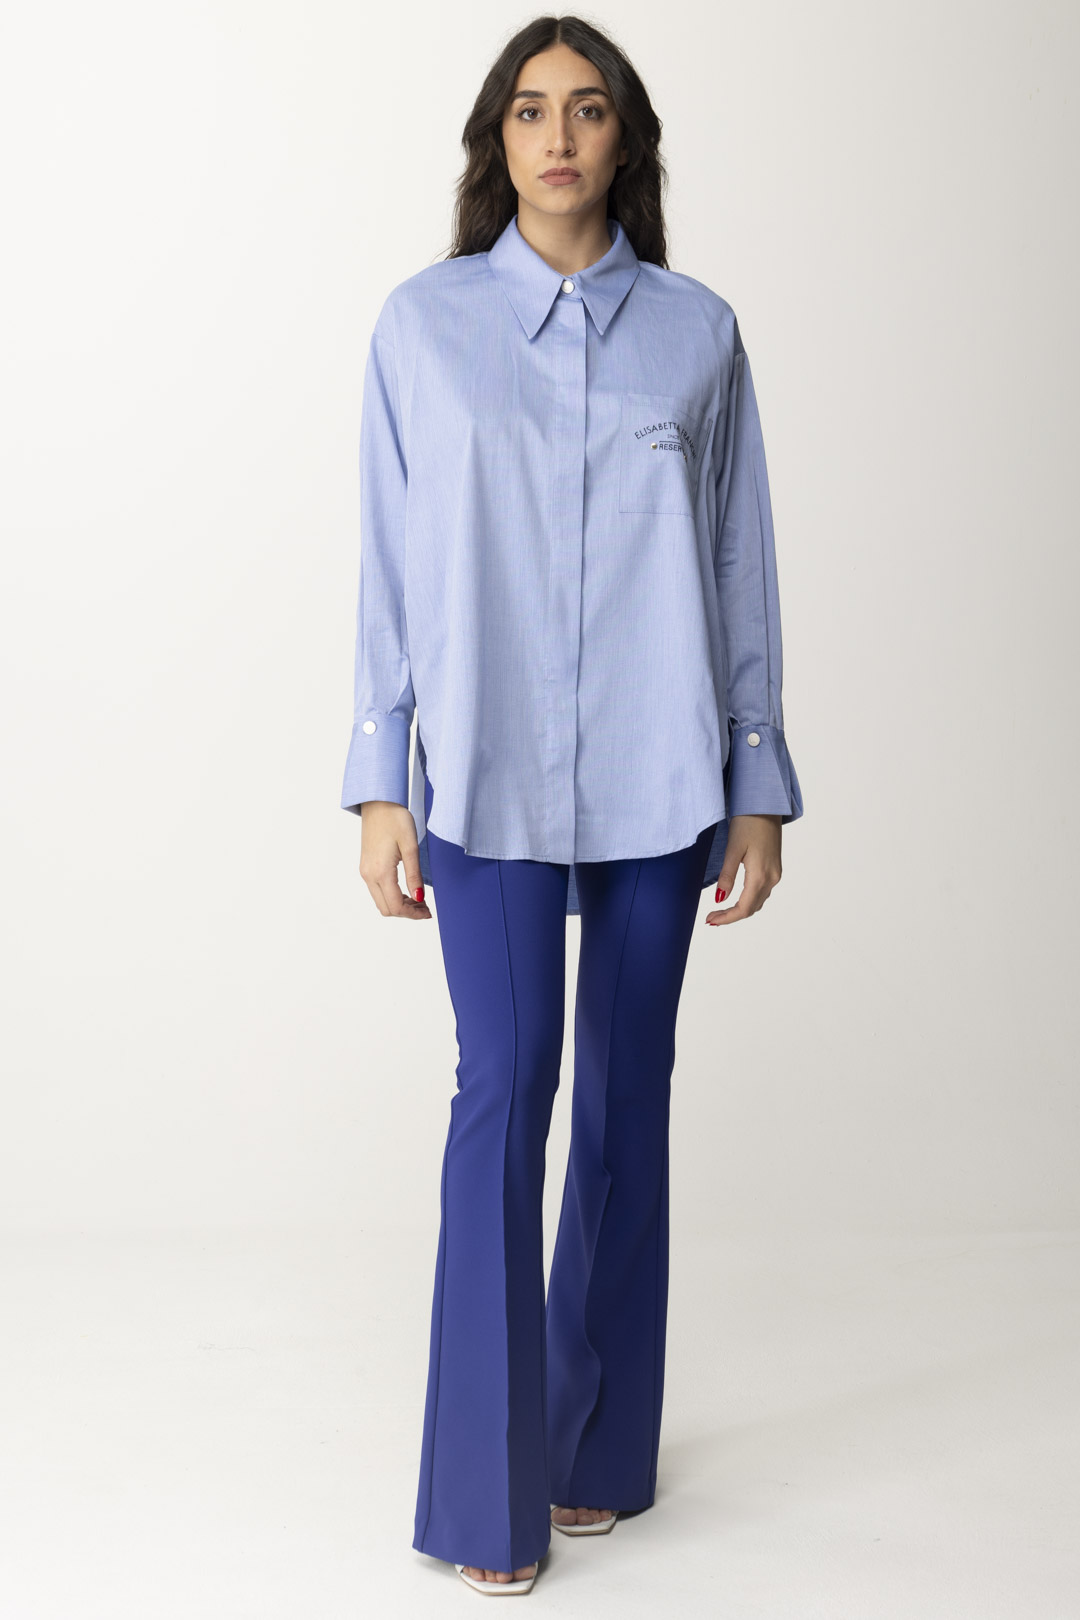 Preview: Elisabetta Franchi Flared Shirt with Reserved Embroidery Oxford